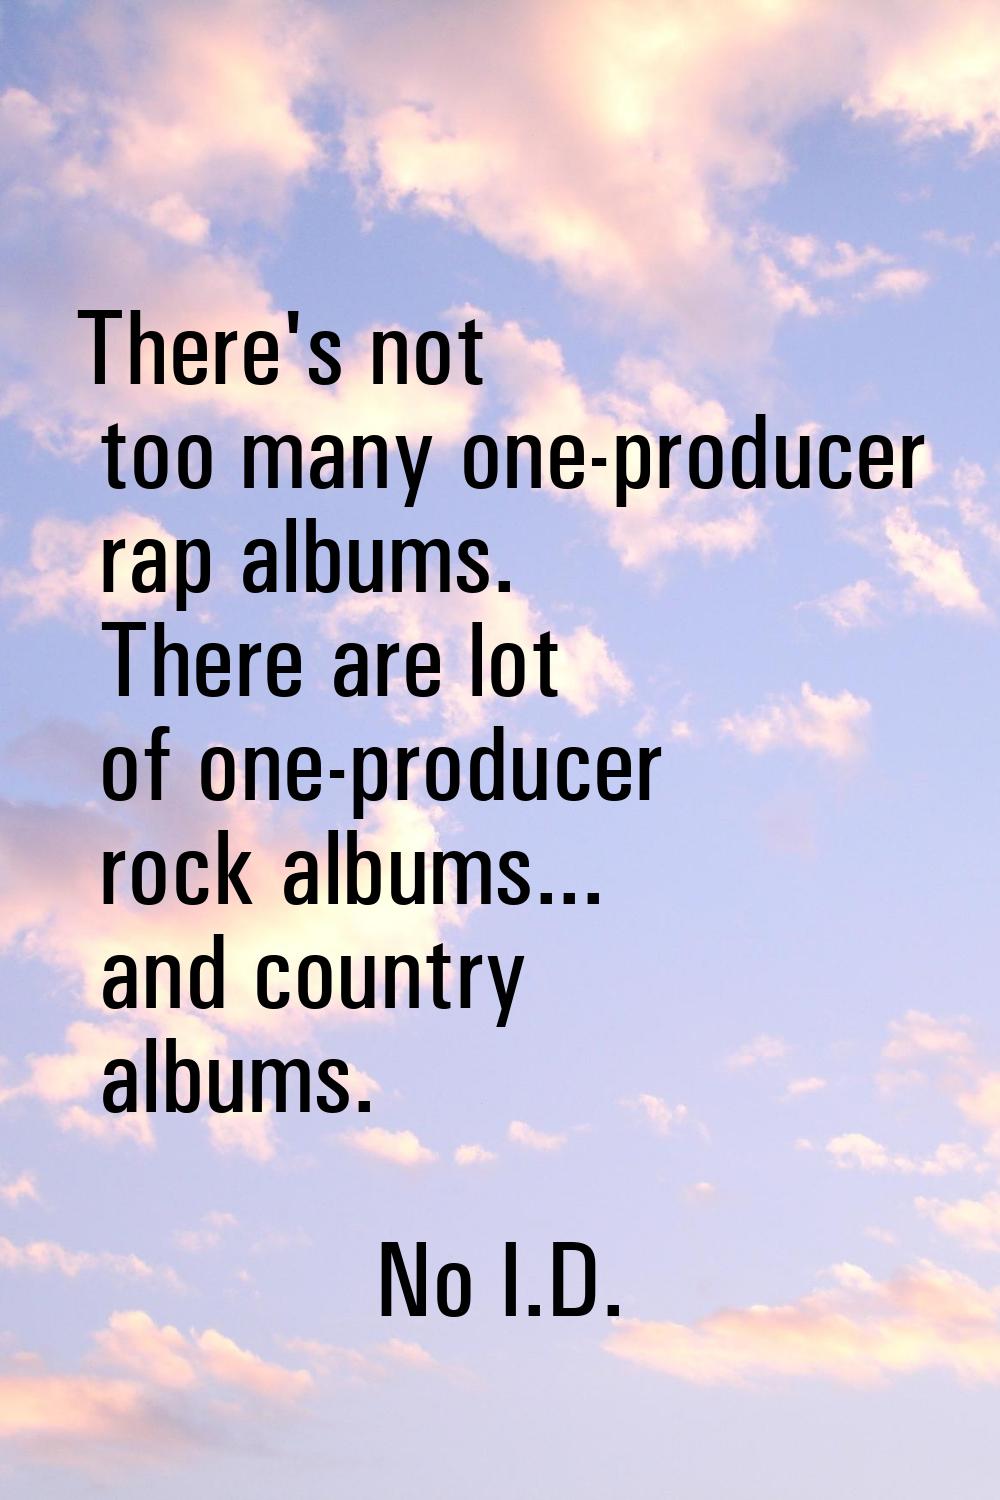 There's not too many one-producer rap albums. There are lot of one-producer rock albums... and coun